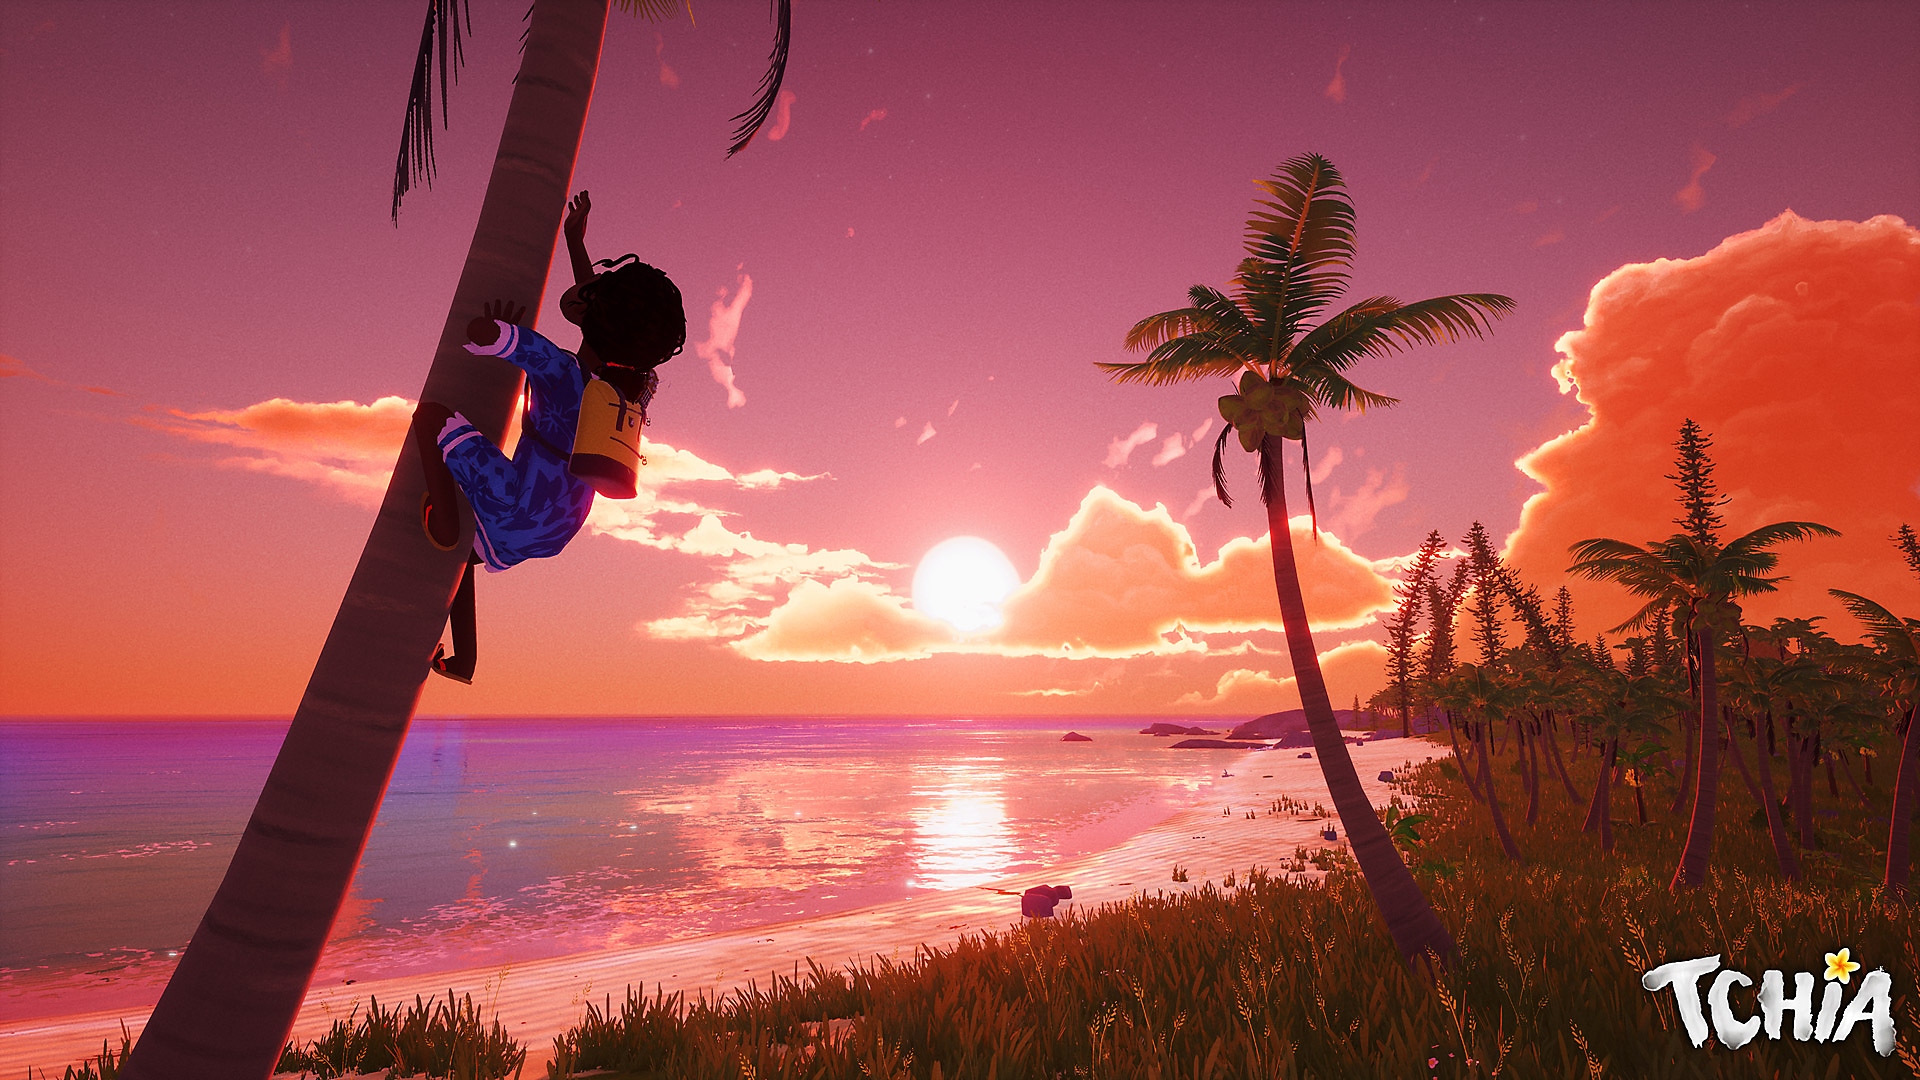 Tchia screenshot showing main character climbing a tree with a beautiful sunset in the distance